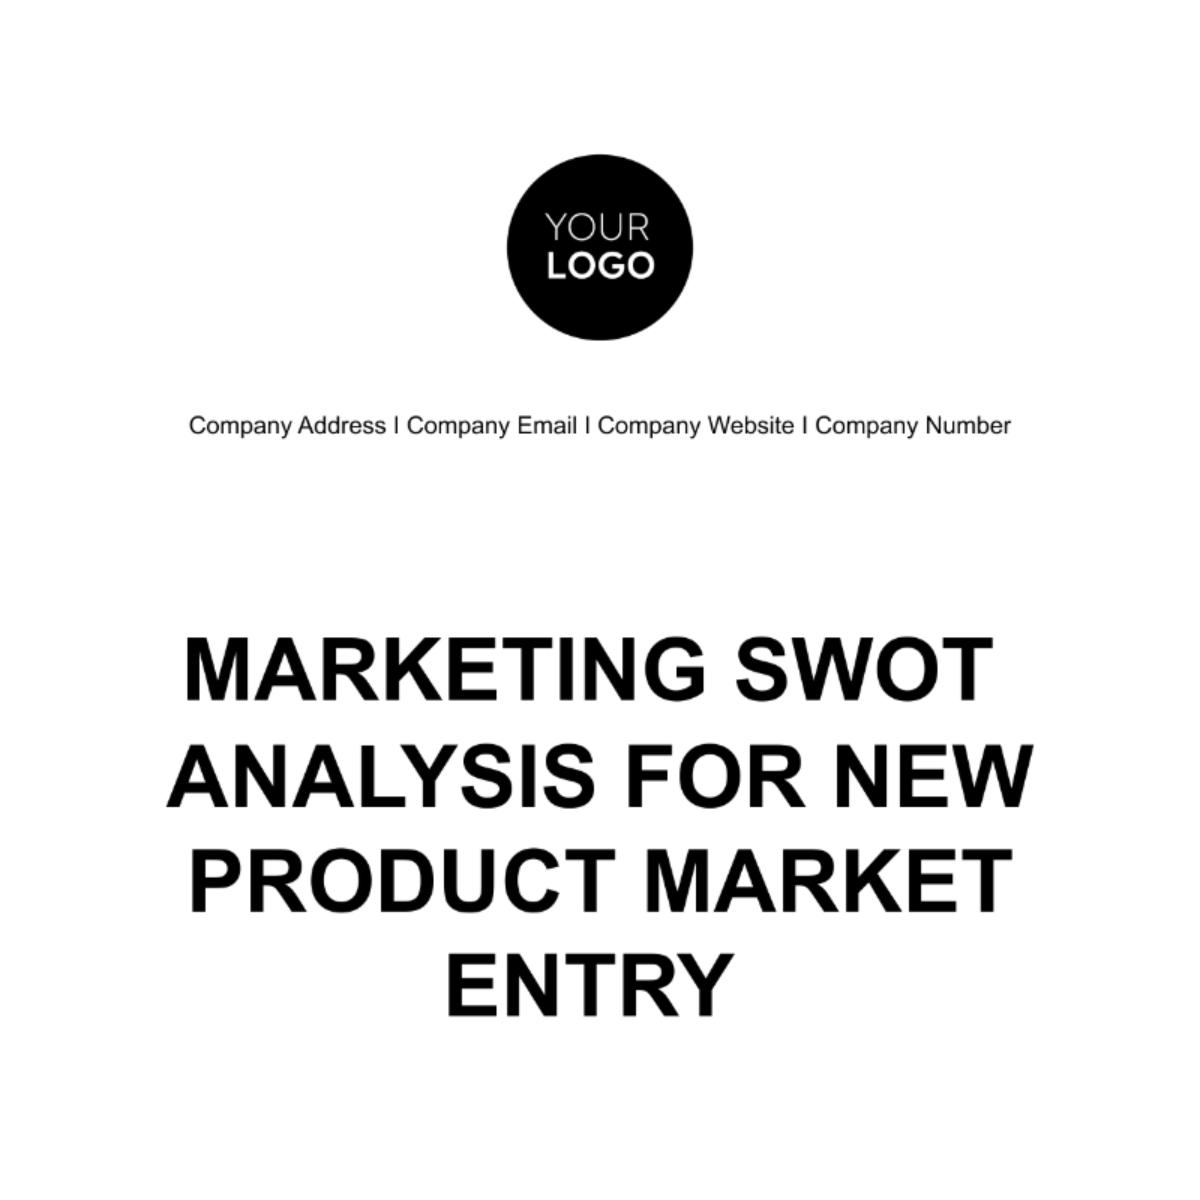 Marketing SWOT Analysis for New Product Market Entry Template